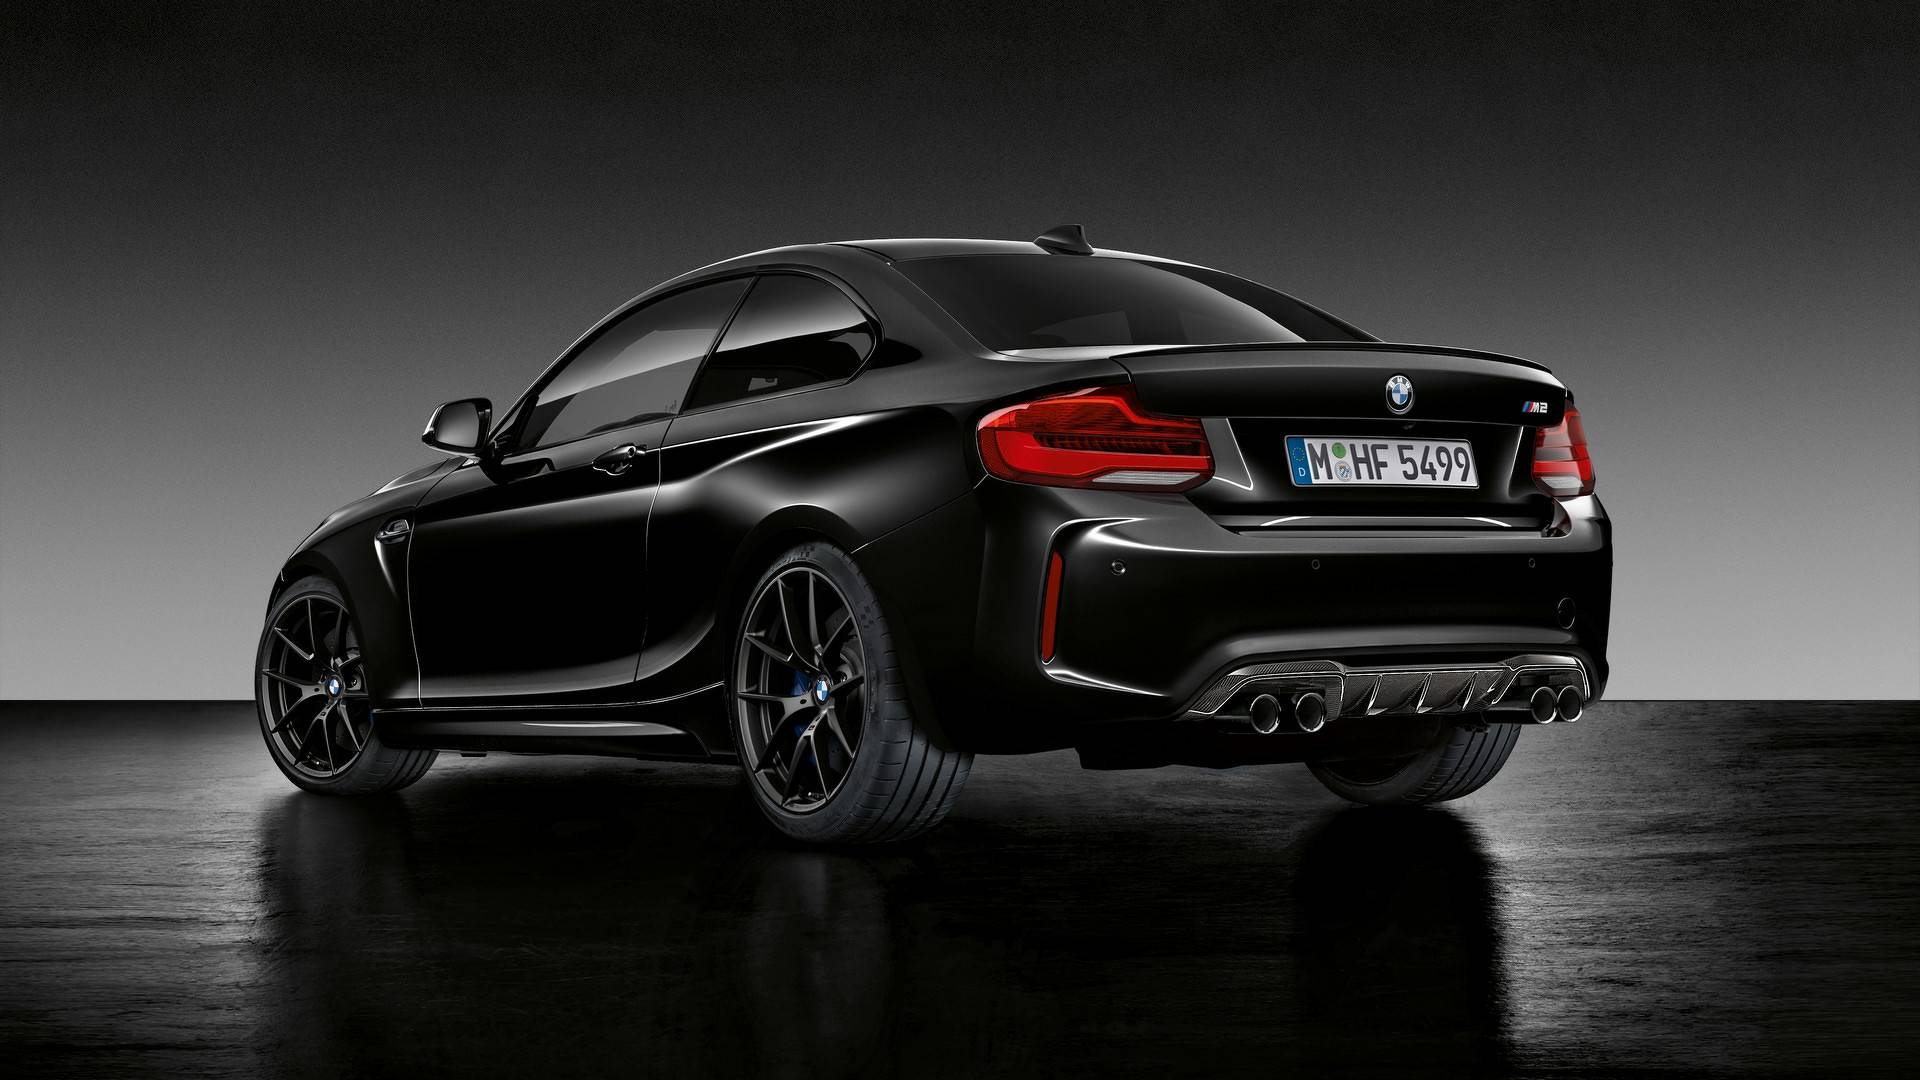 BMW M2 Coupe Edition Black Shadow